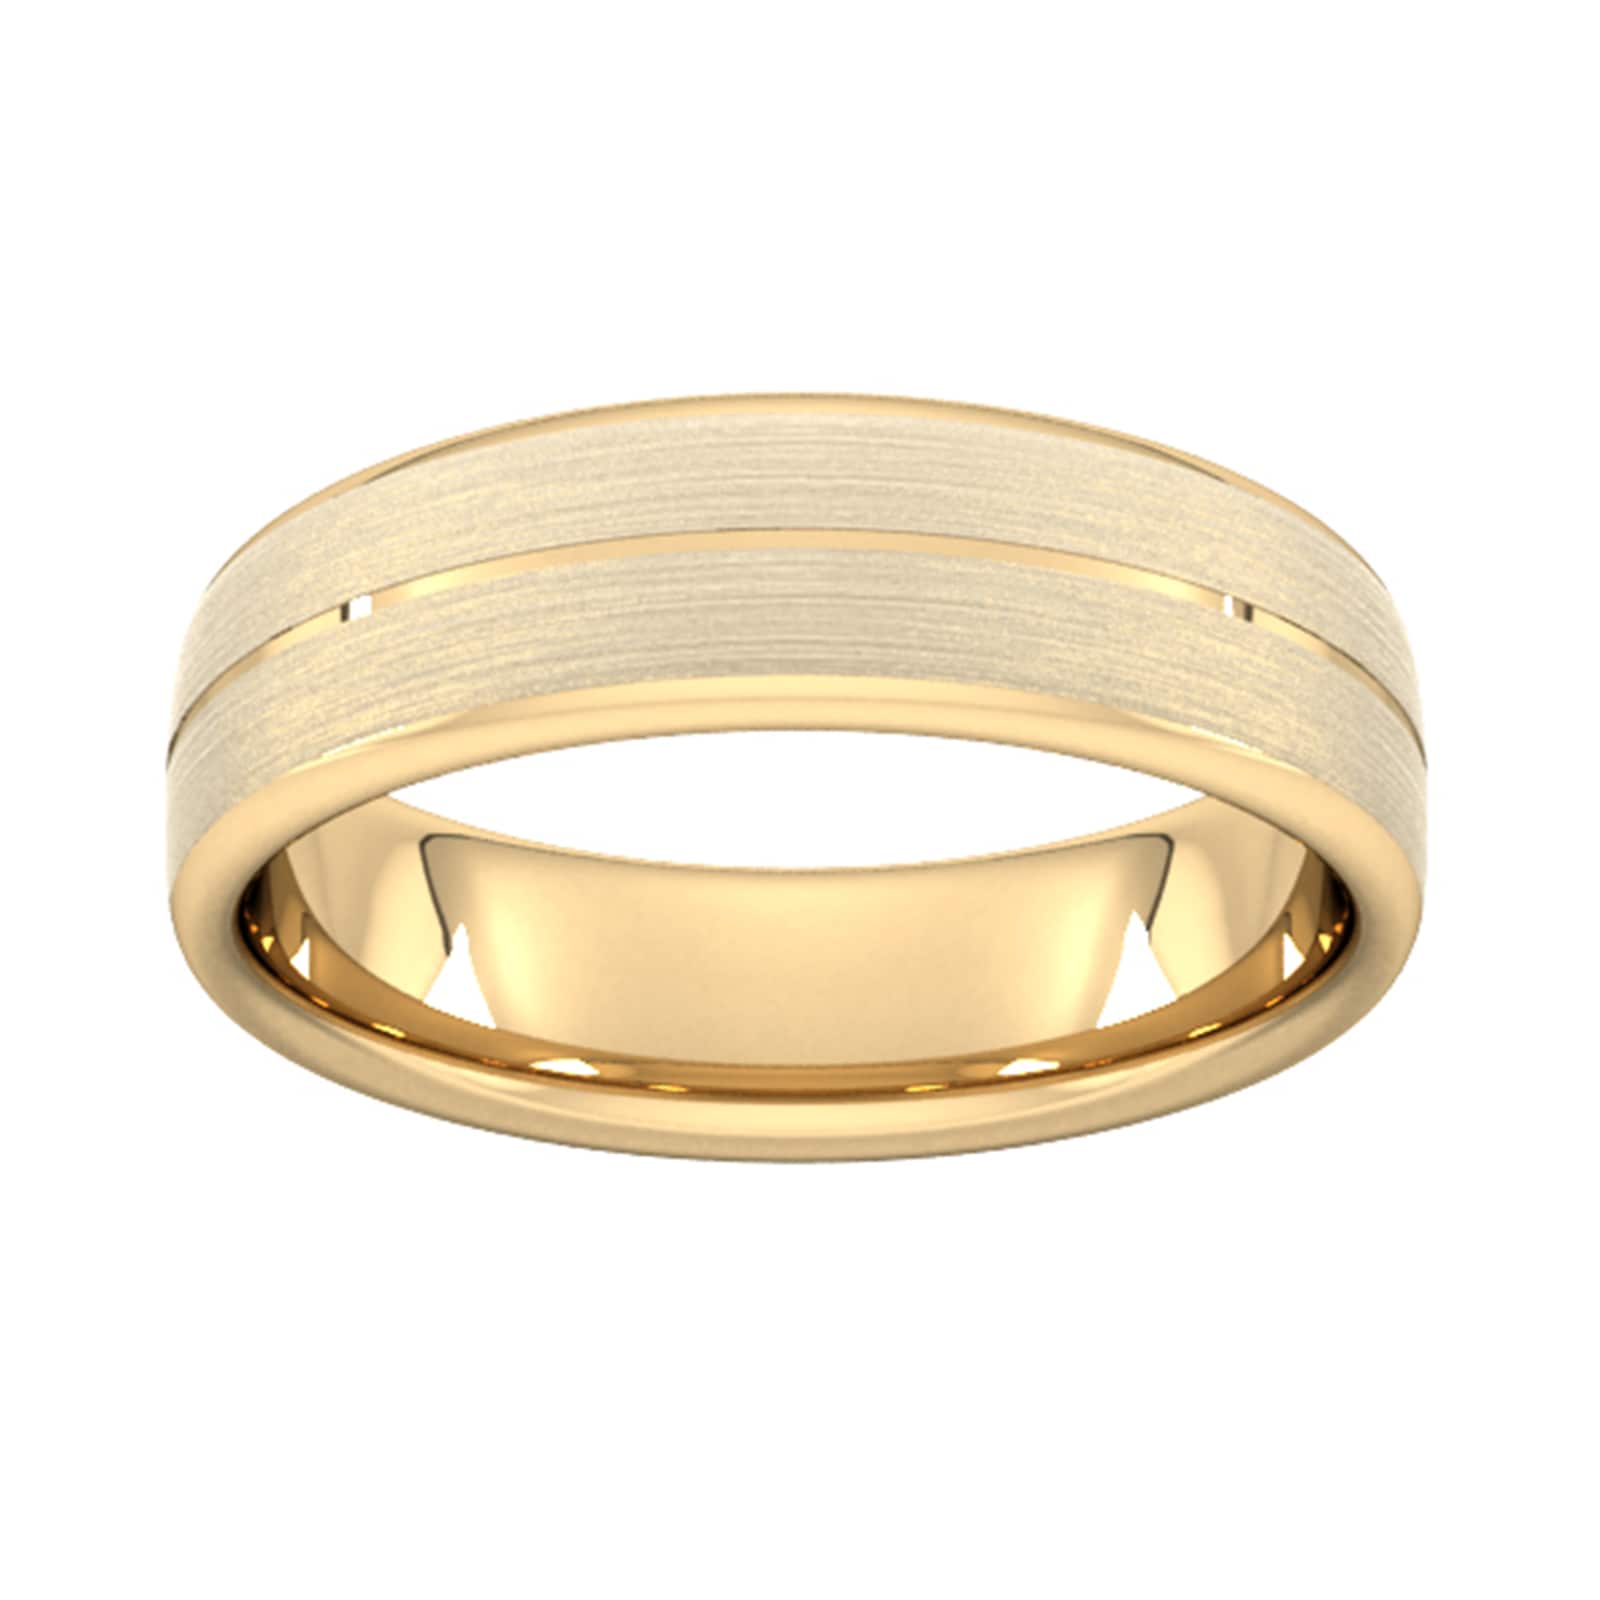 6mm D Shape Heavy Centre Groove With Chamfered Edge Wedding Ring In 18 Carat Yellow Gold - Ring Size H